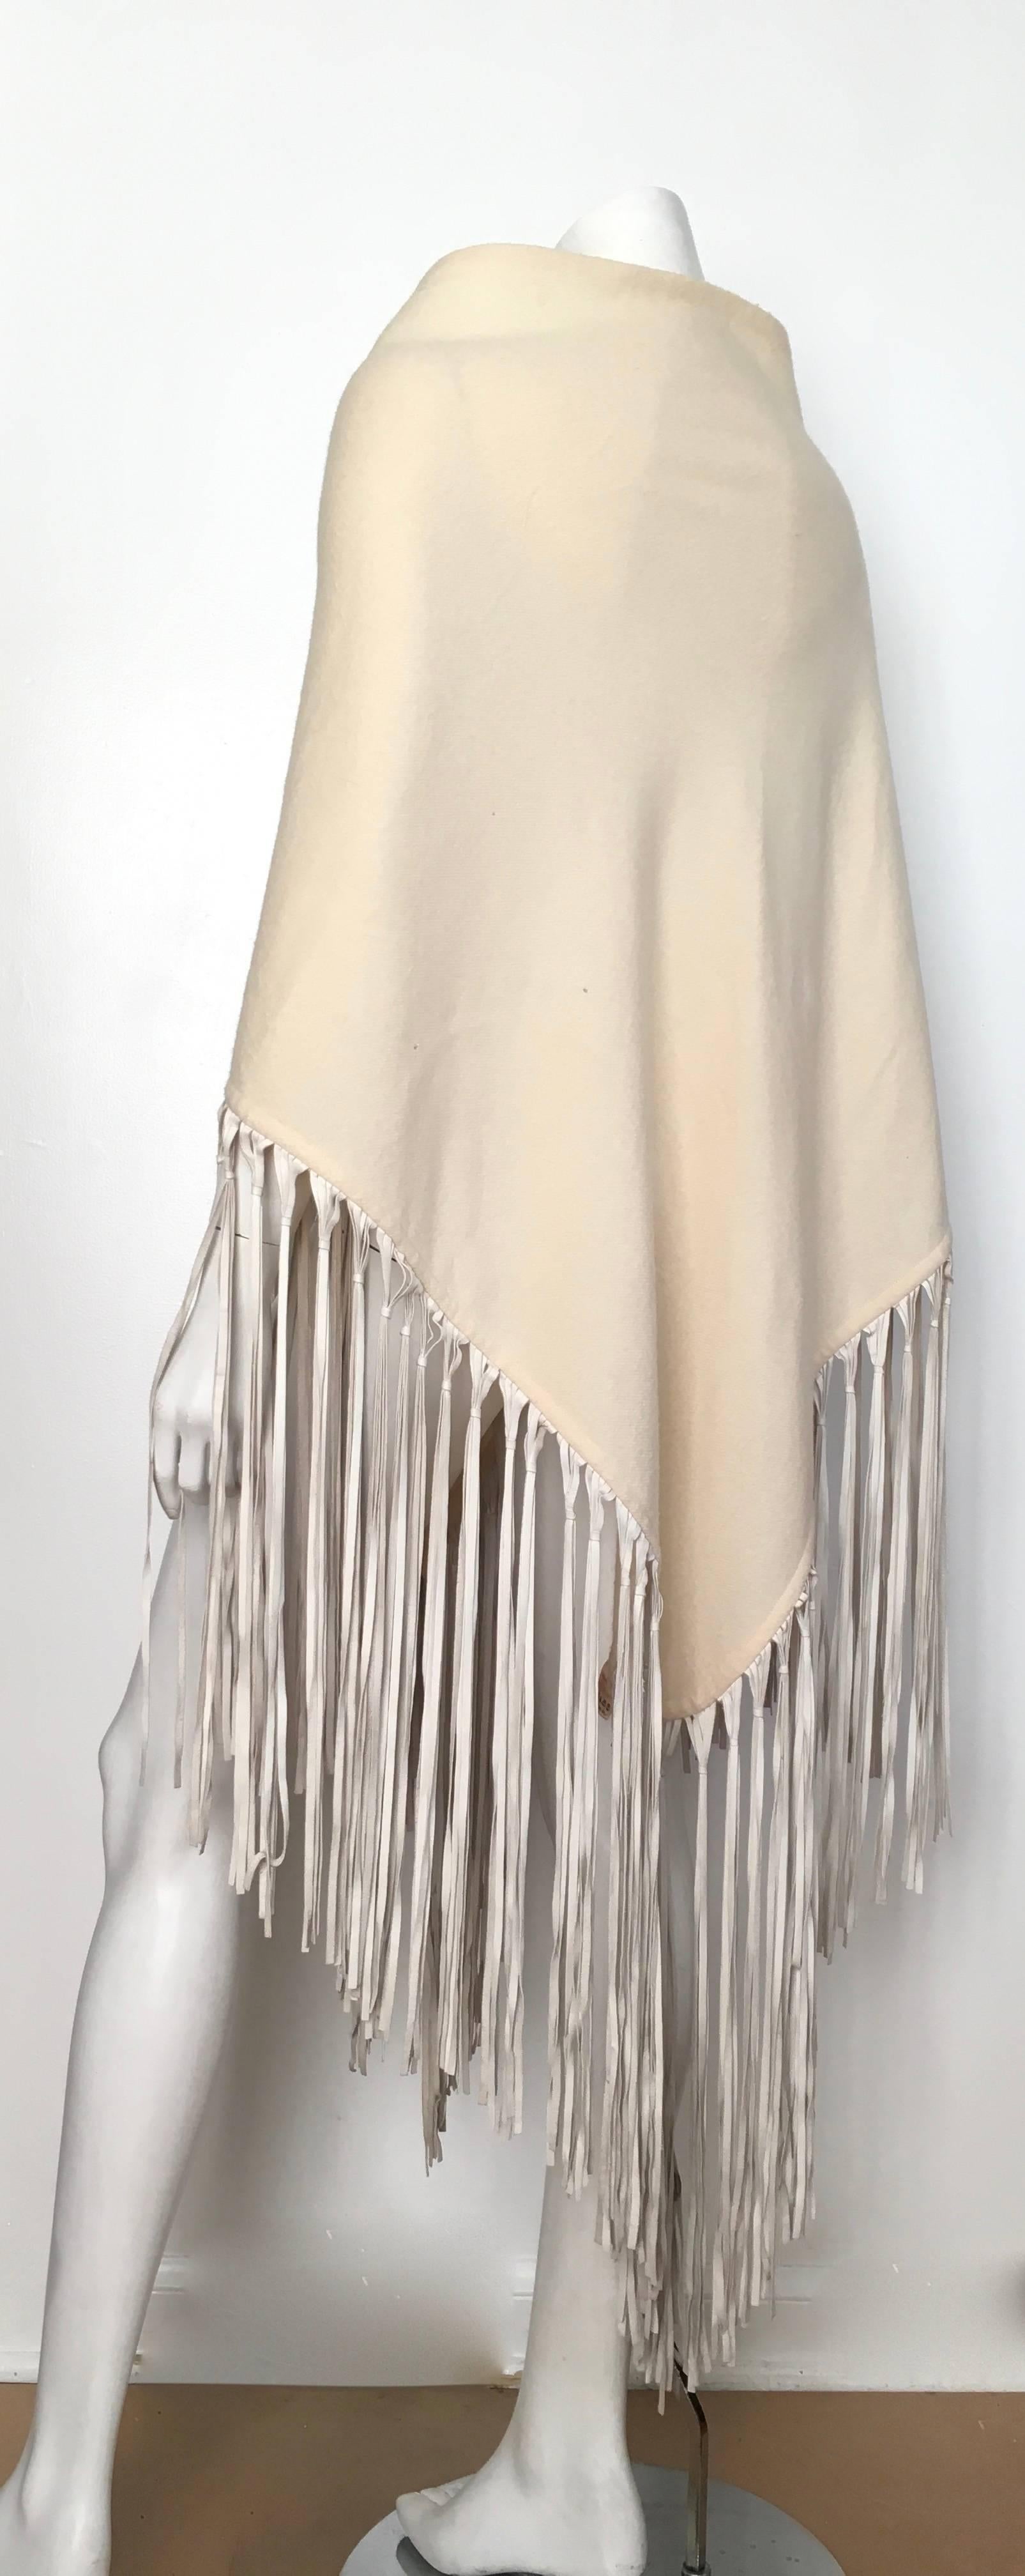 Women's or Men's Hermes Cream Cashmere Shawl with Leather Fringe. 